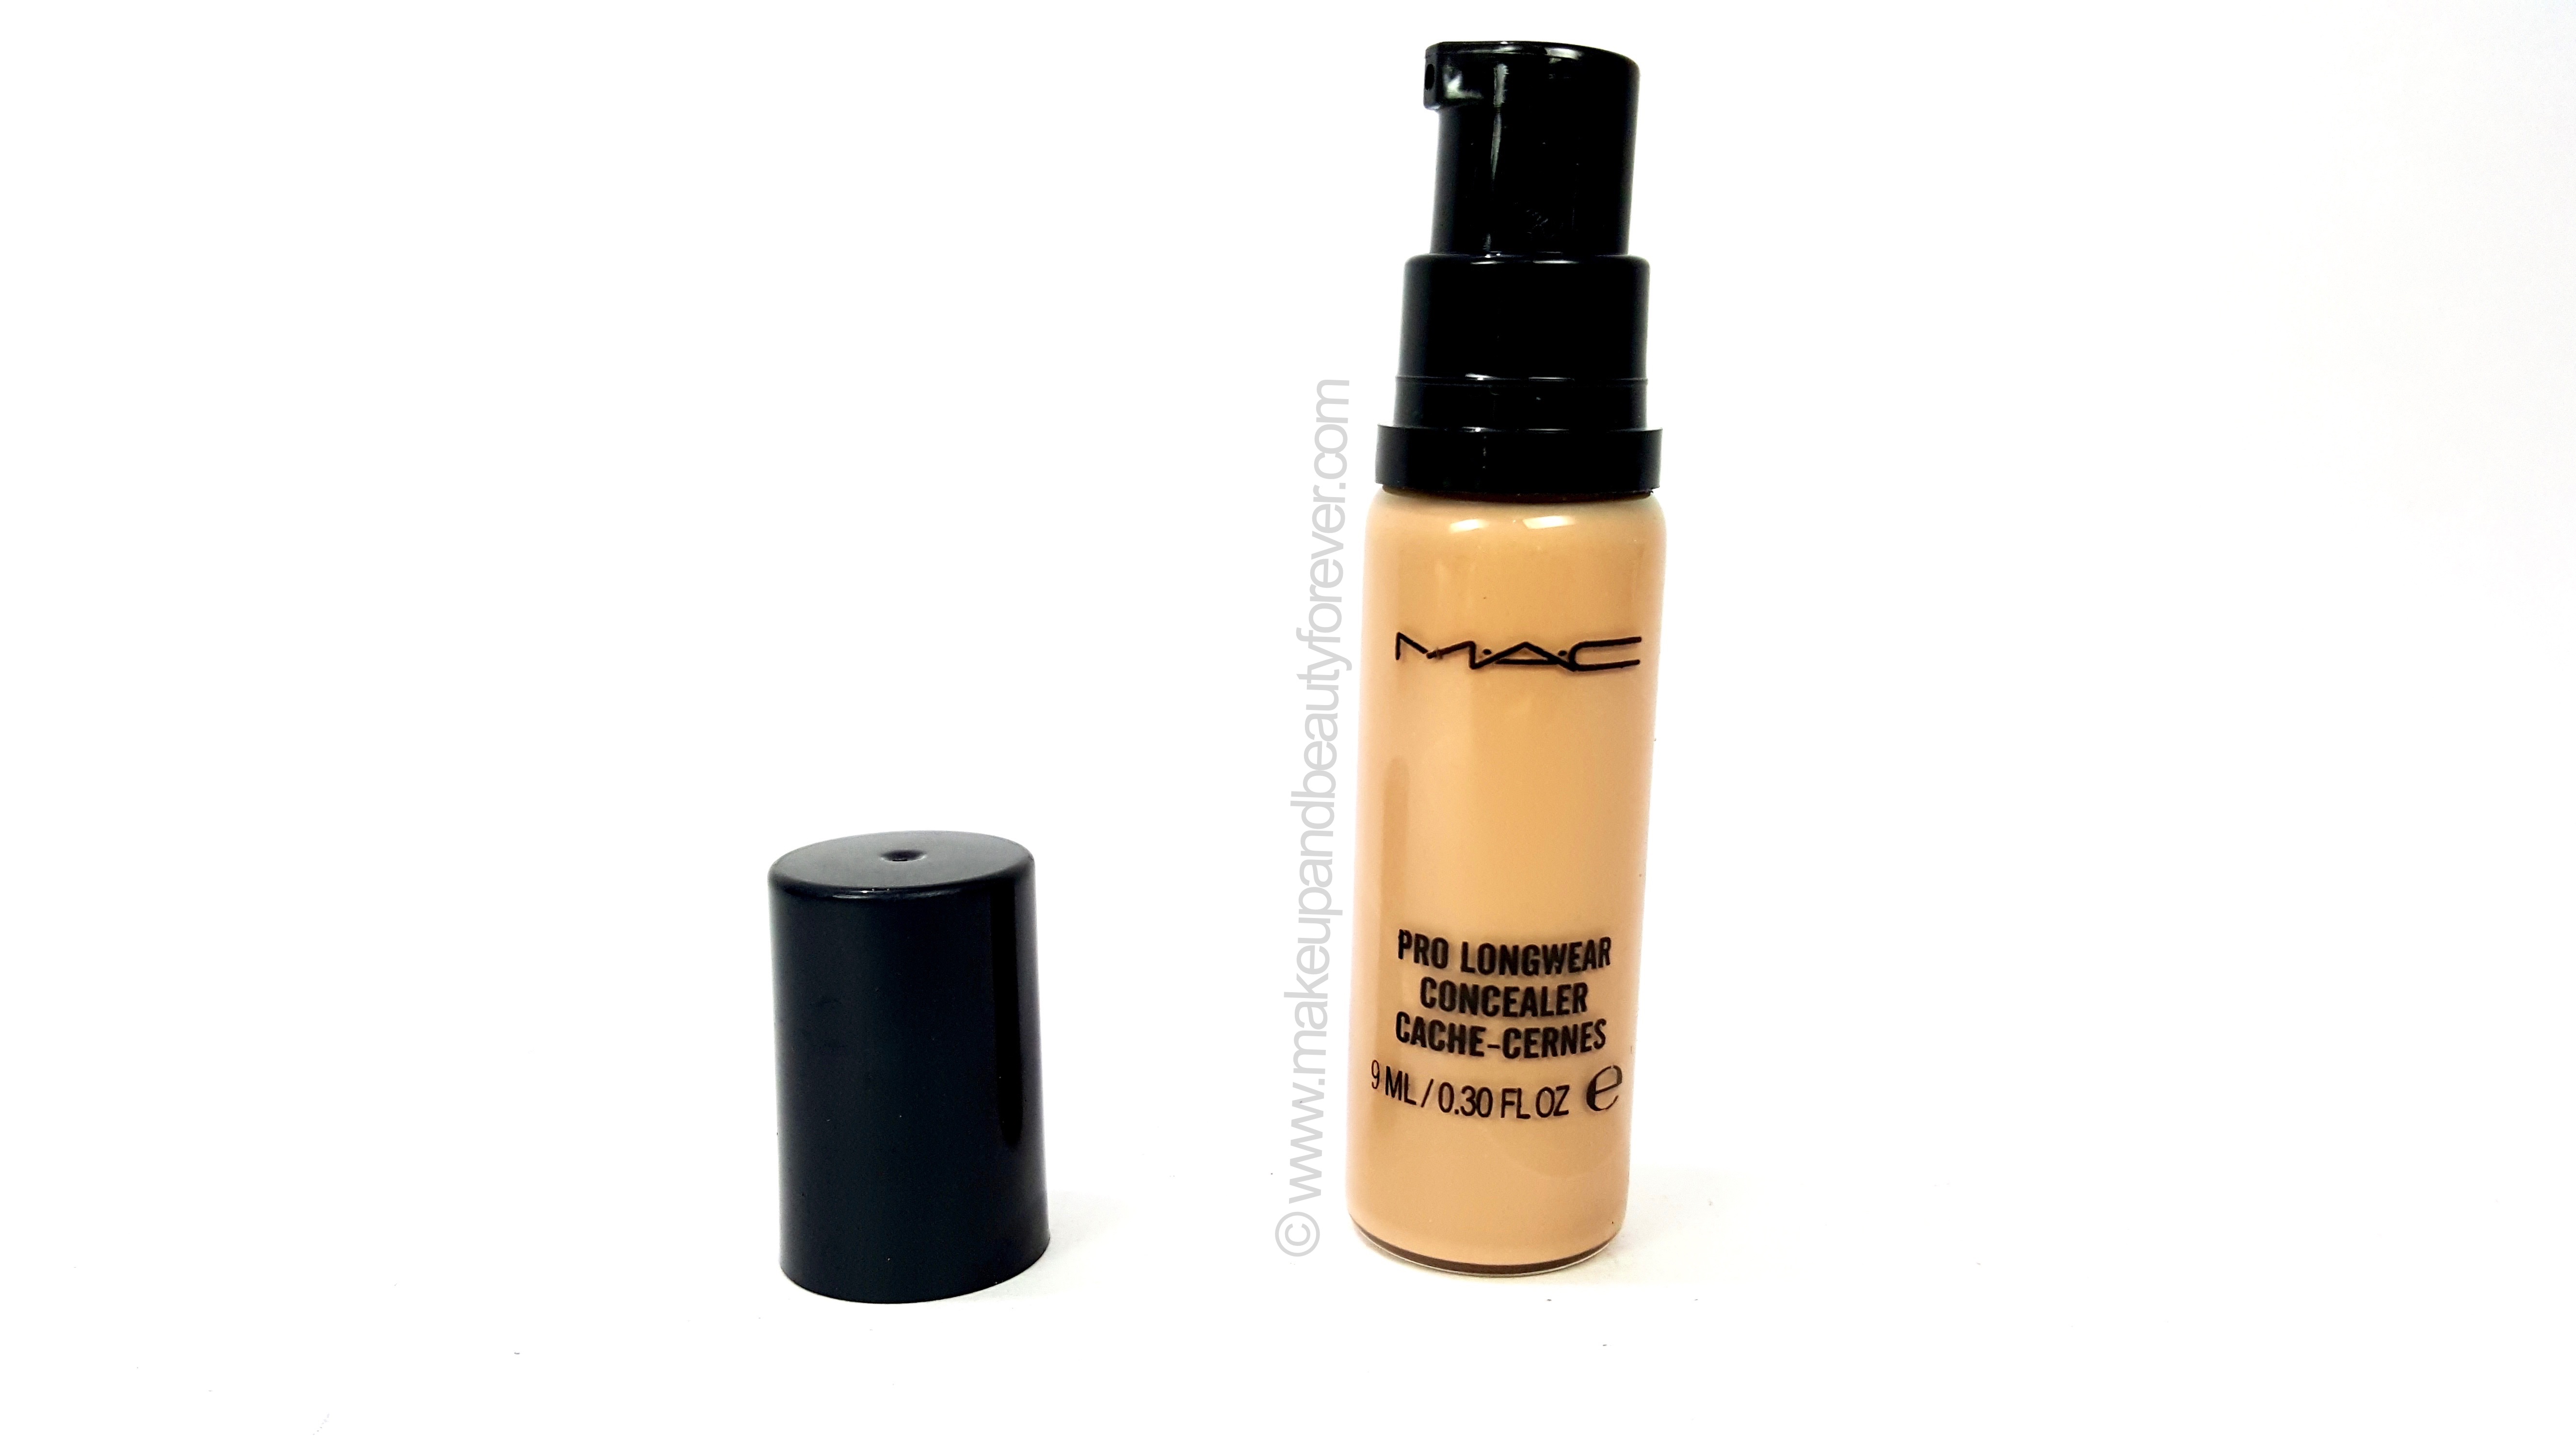 Pro Longwear Concealer Review, Swatches